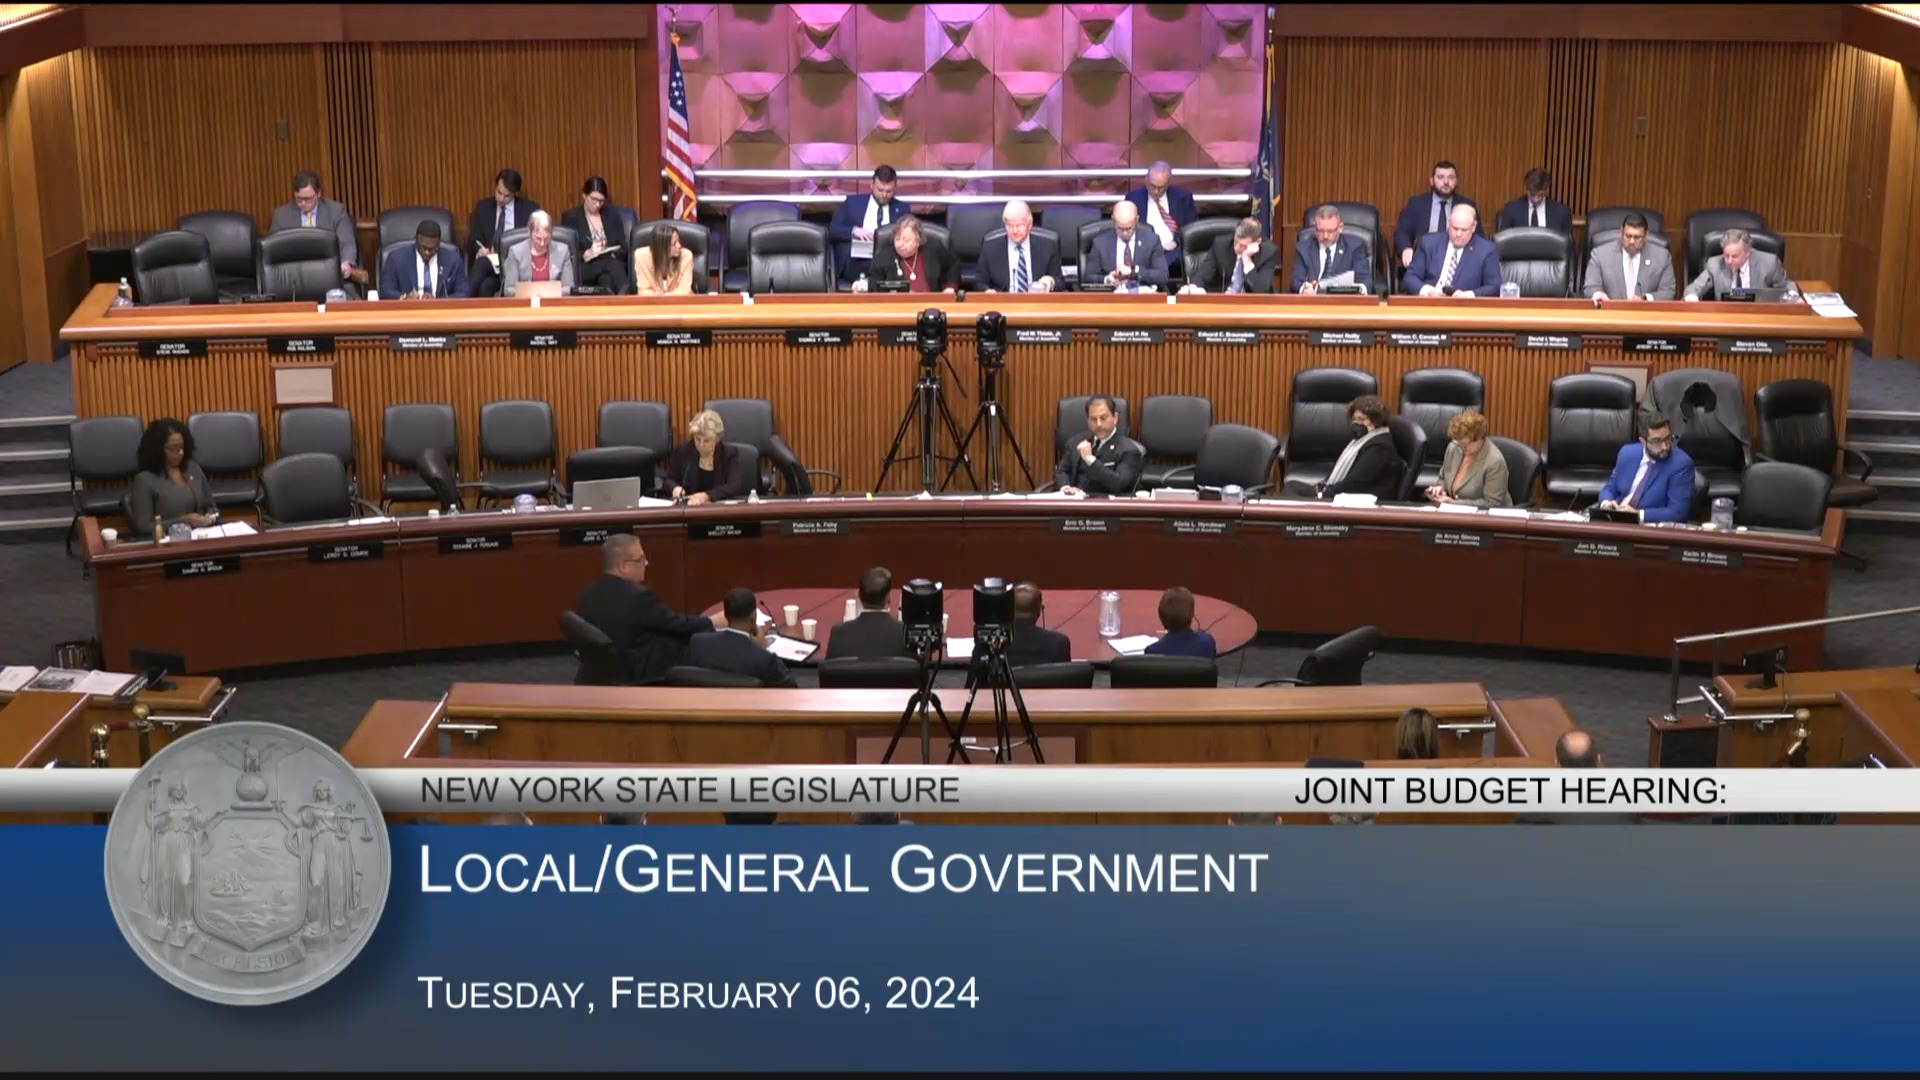 Big City Mayors Testify During Budget Hearing on Local/General Government